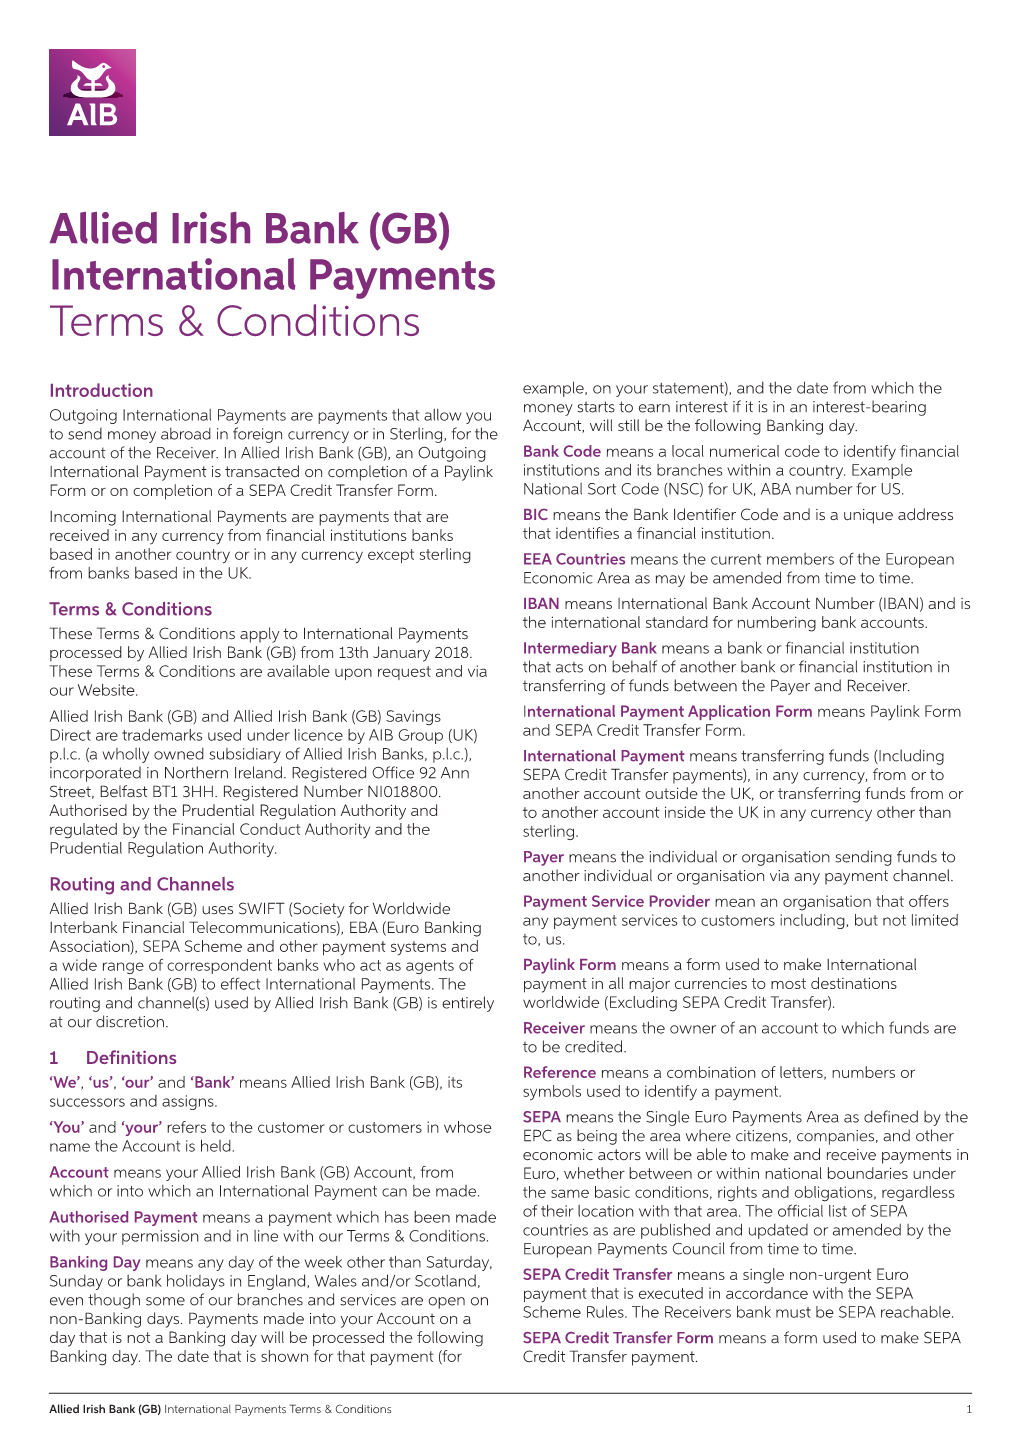 Allied Irish Bank (GB) International Payments Terms & Conditions